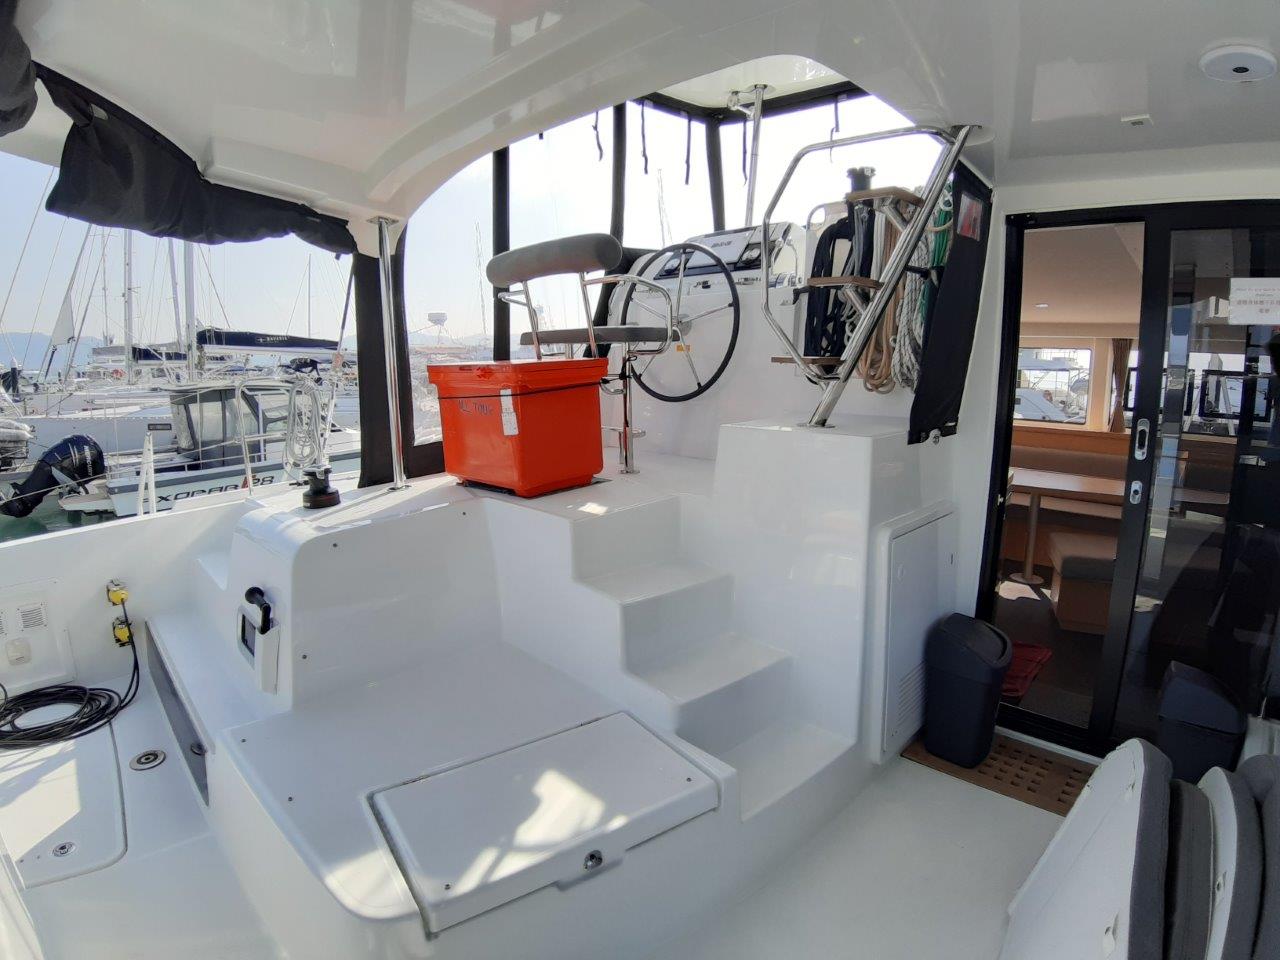 Lagoon 42 - Yacht Charter Queensland & Boat hire in Australia Queensland Whitsundays Coral Sea Marina 5